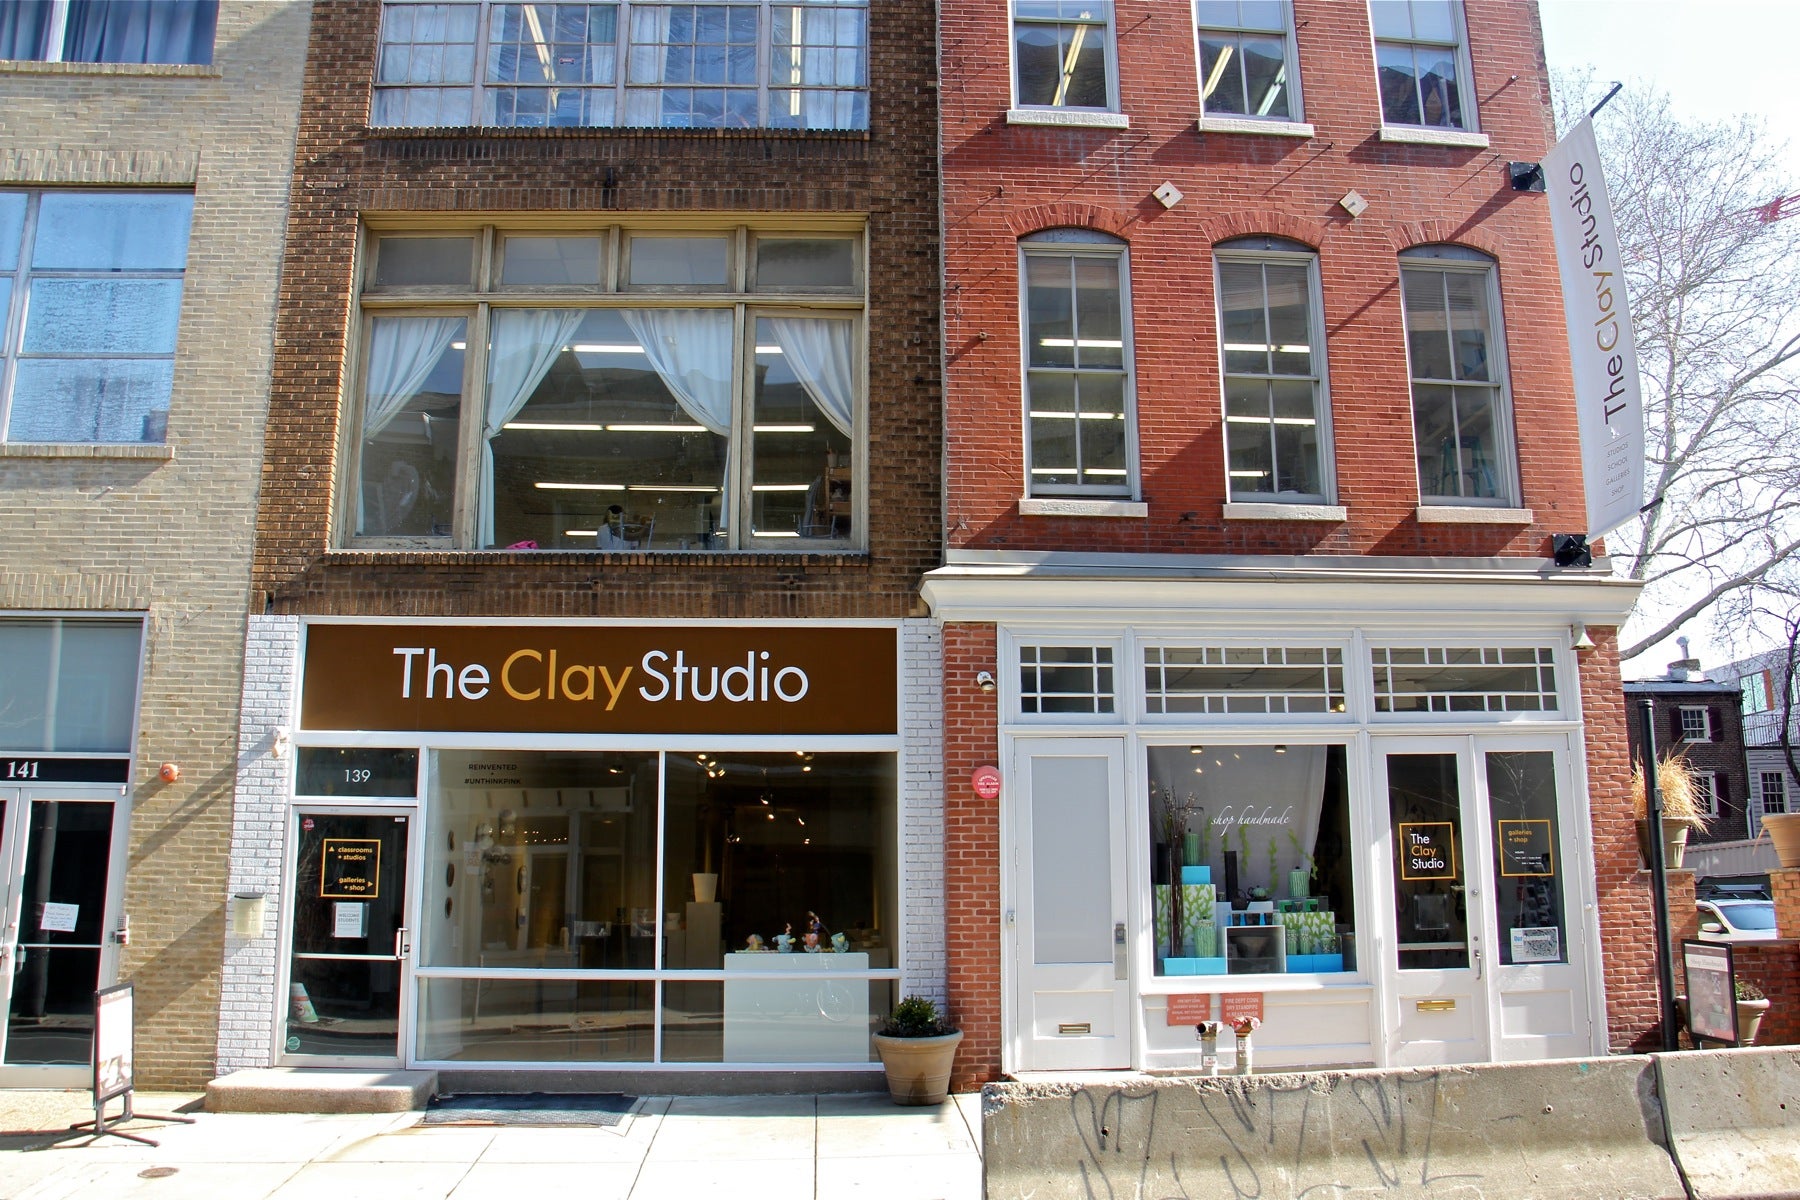 The Clay Studio currently occupies a couple of storefronts on Second Street in Old City. 